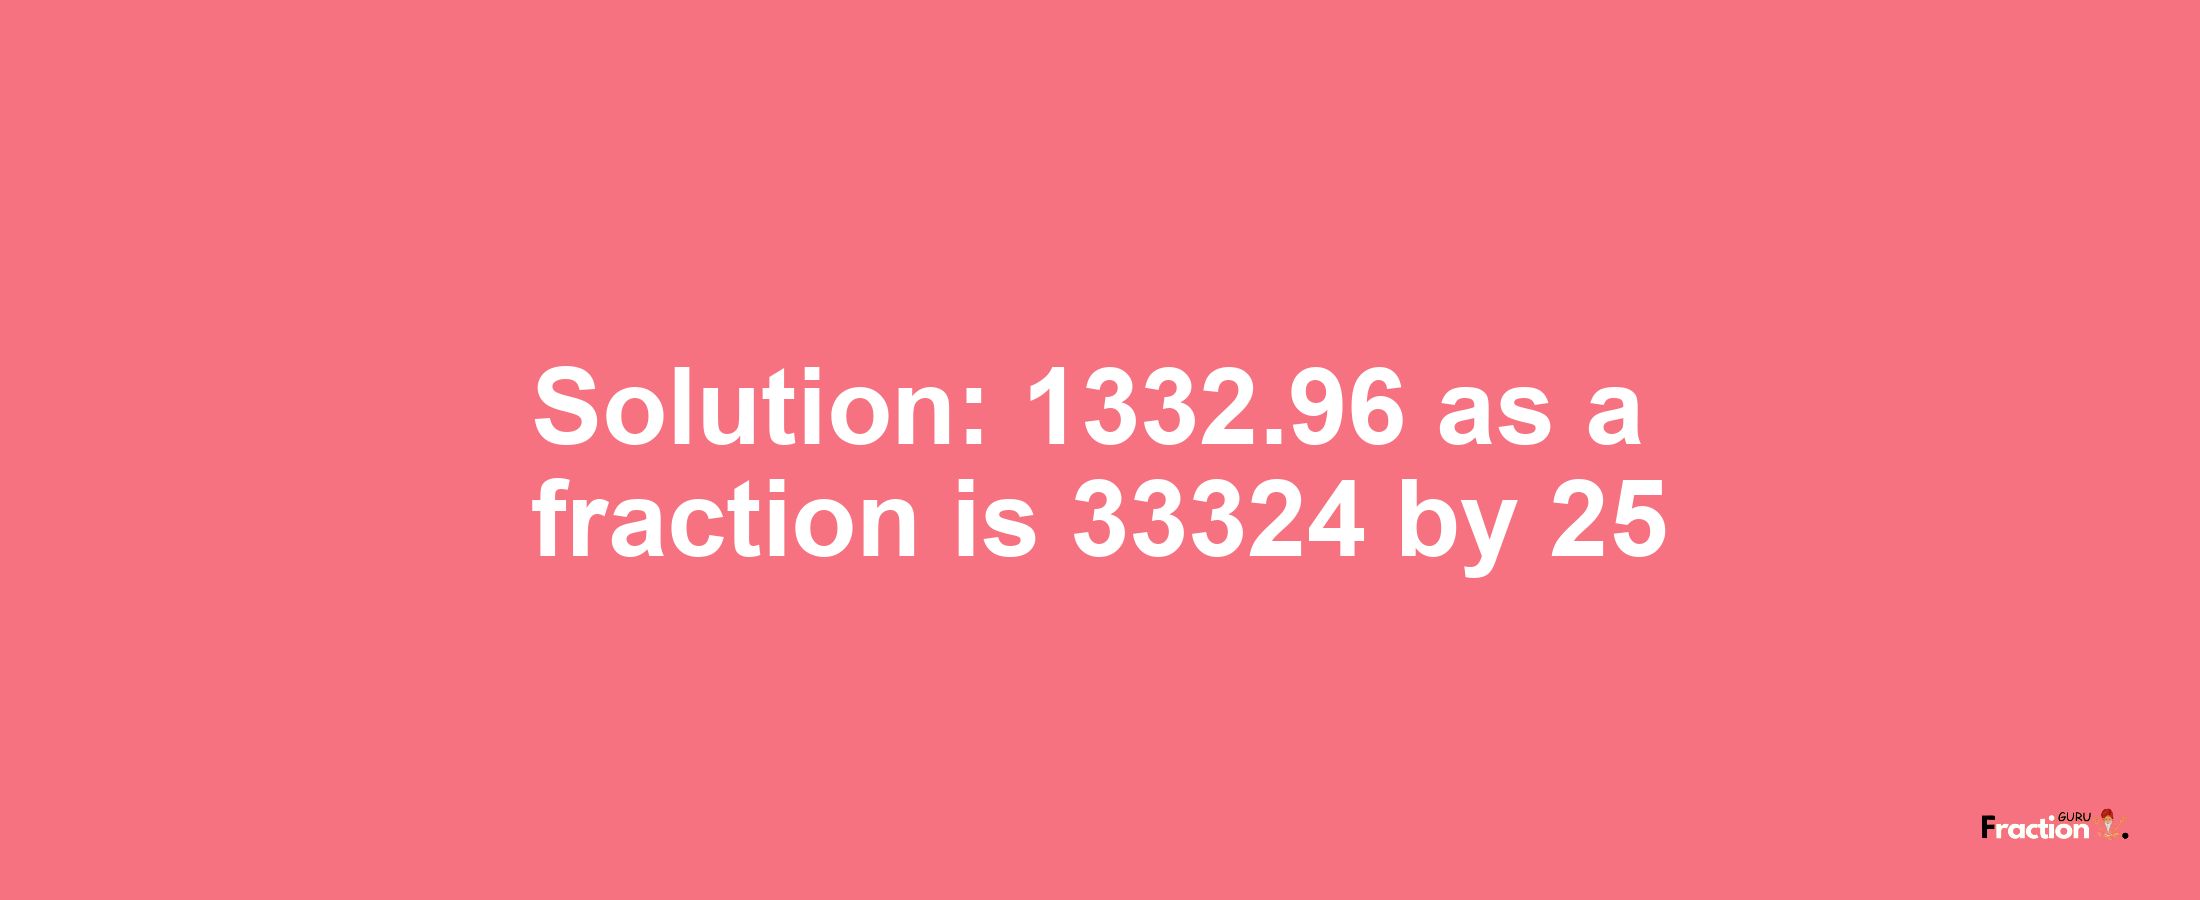 Solution:1332.96 as a fraction is 33324/25